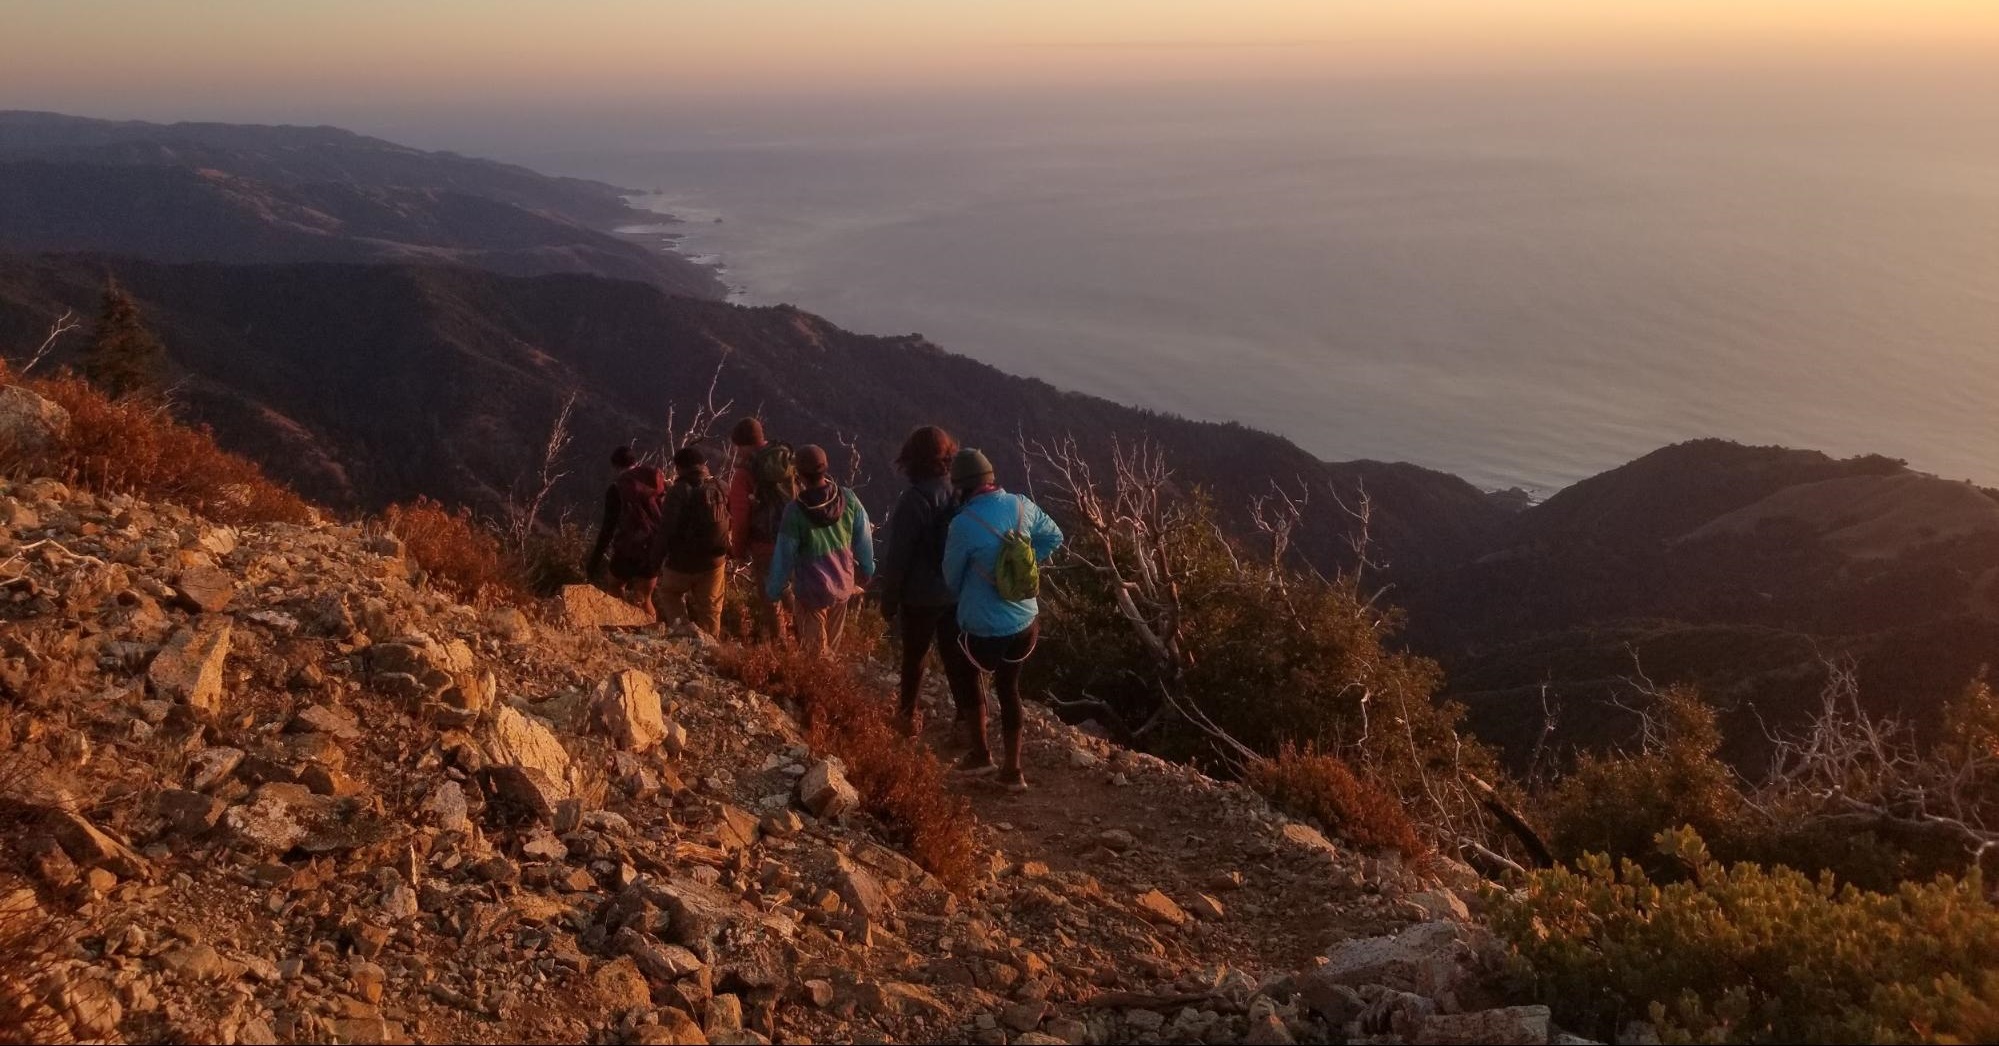 Fall 2019 Wellness Program Big Sur Backpacking Trip with Youth In Wilderness Alliance.